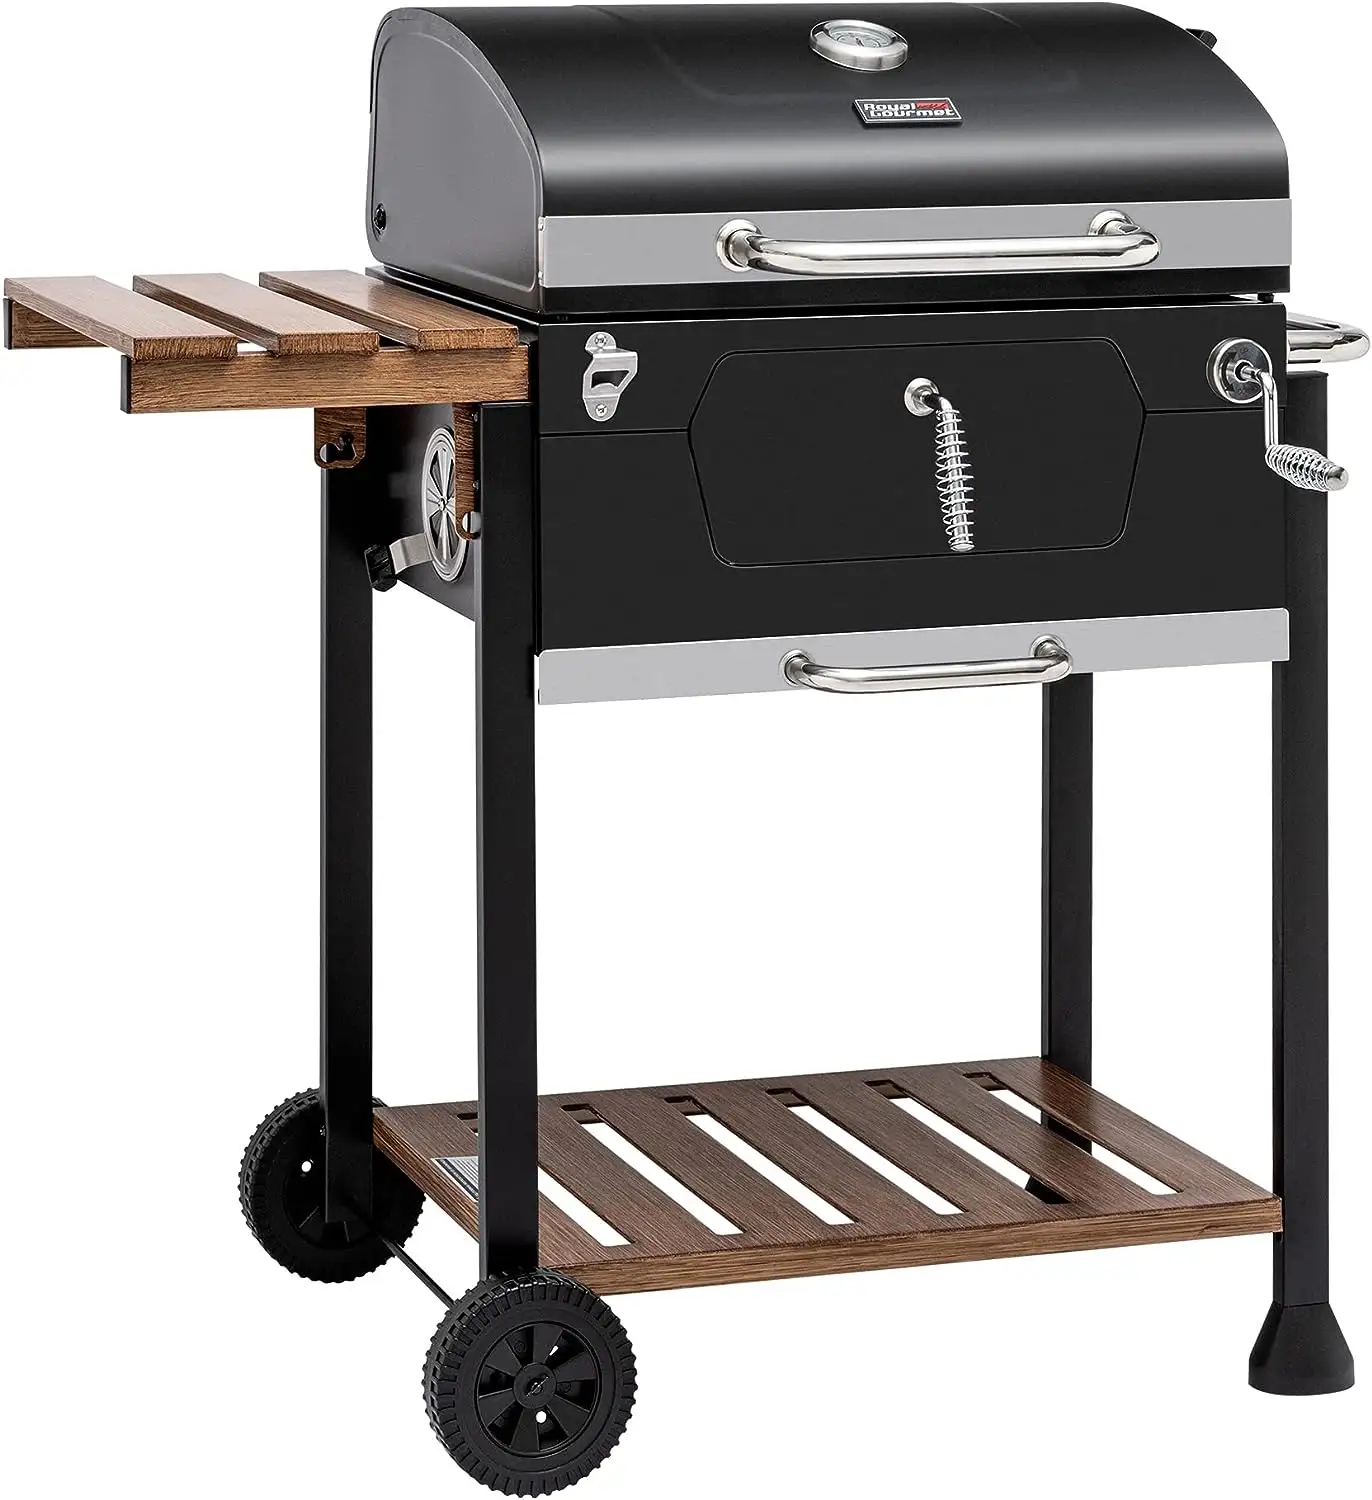 Trolley Black Medium Charcoal Grill BBQ Smoker Handle and Folding Table Perfect for Outdoor Steel Garden Cast Iron Not Coated